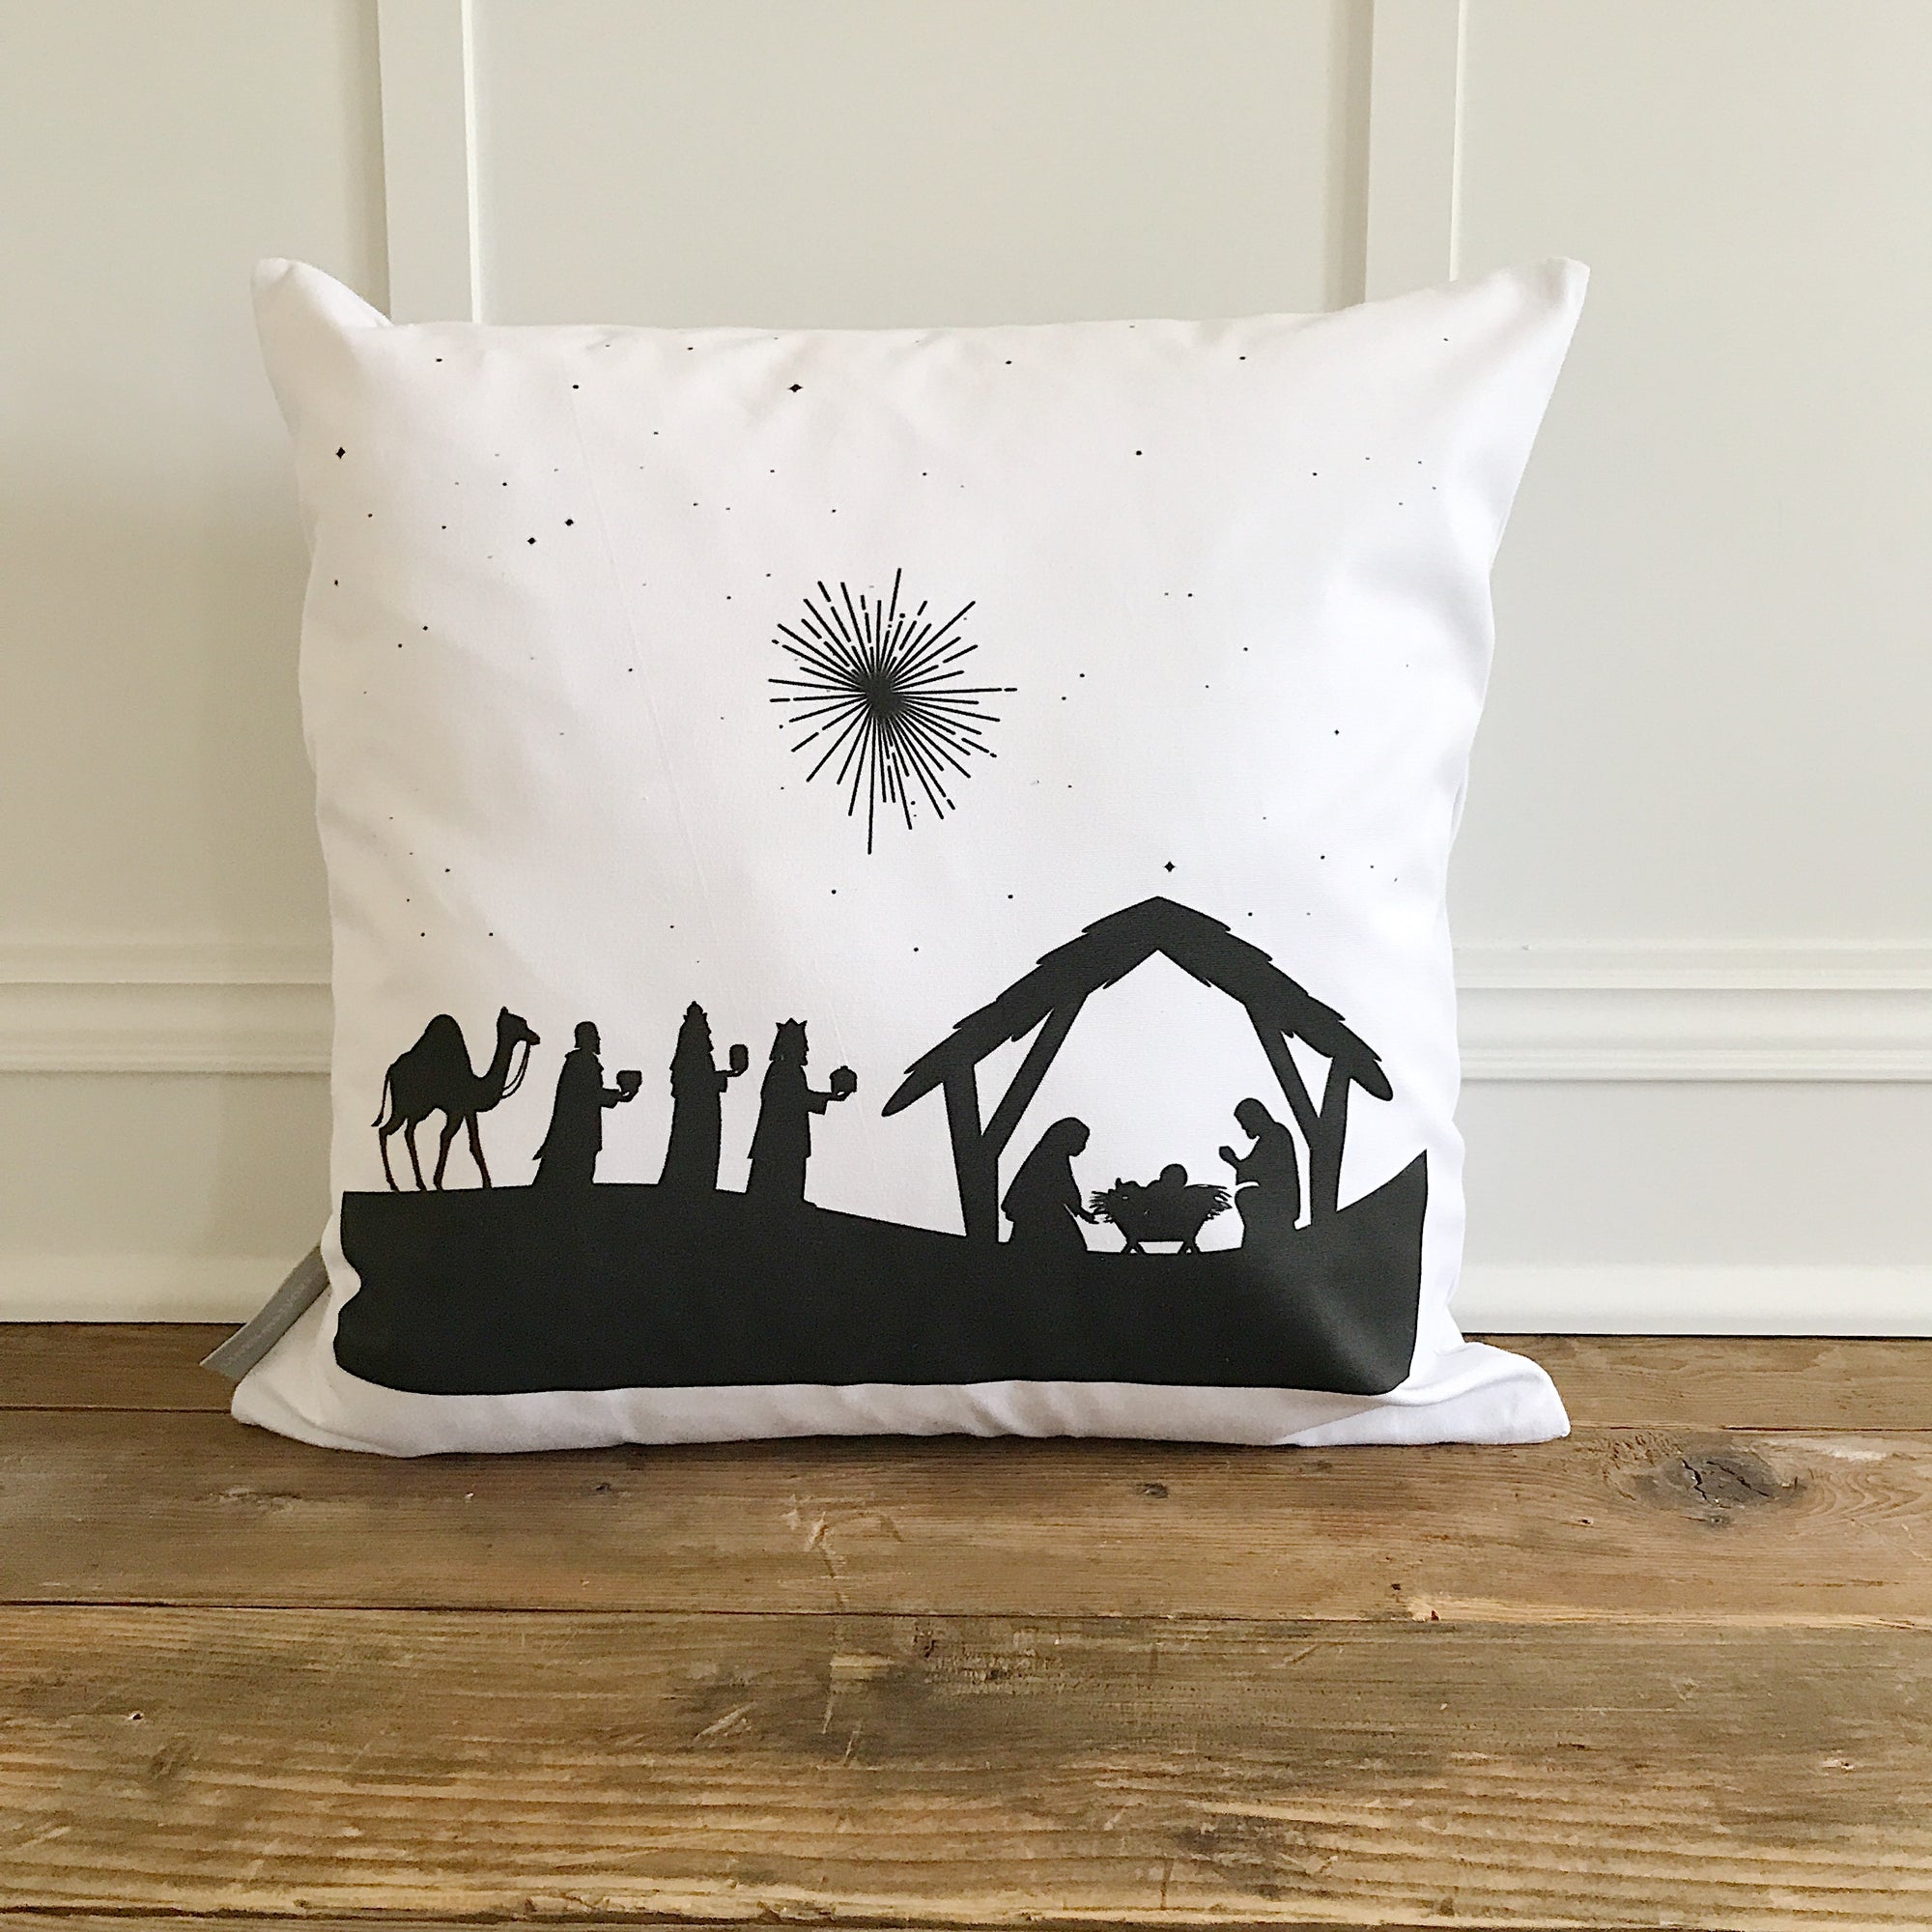 Nativity Pillow Cover - Linen and Ivory